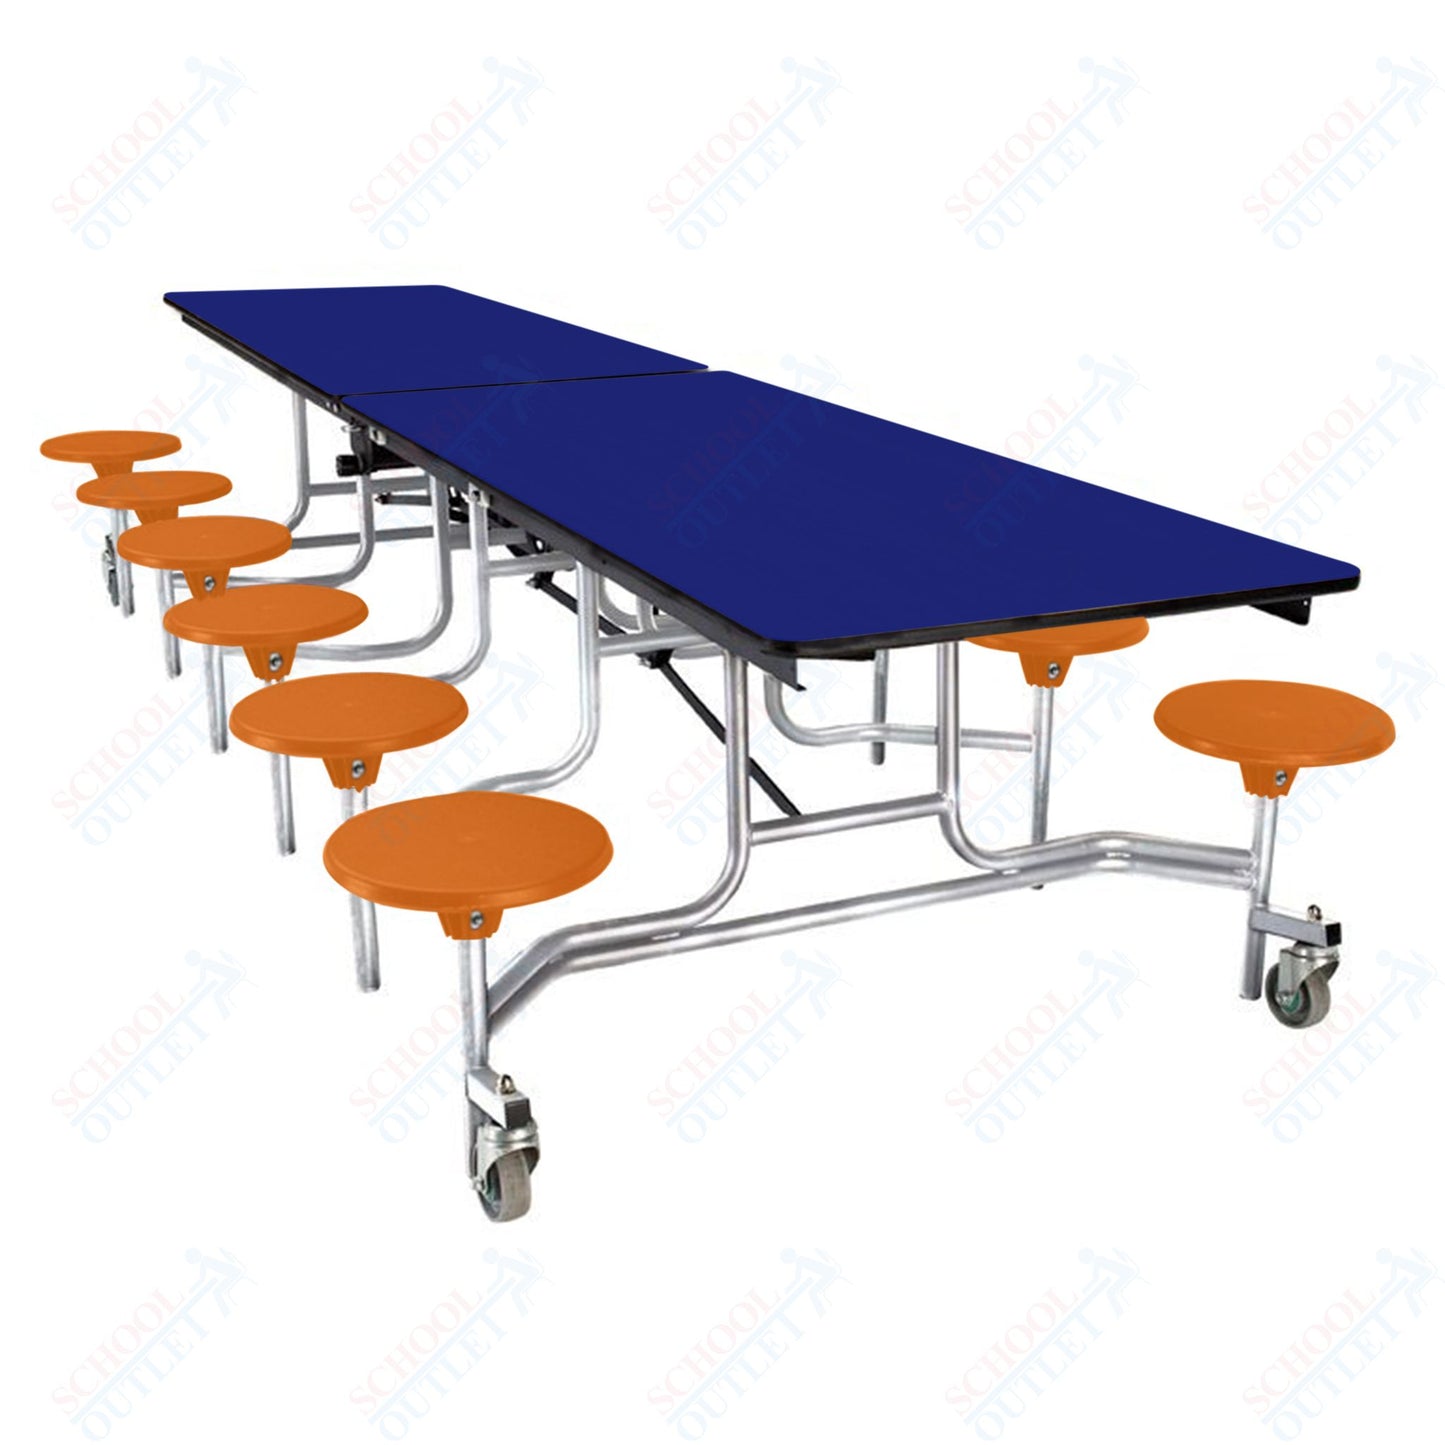 NPS Mobile Cafeteria Table - 30" W x 10' L - 12 Stools  - Particleboard Core - T-Molding Edge - Black Powdercoated Frame